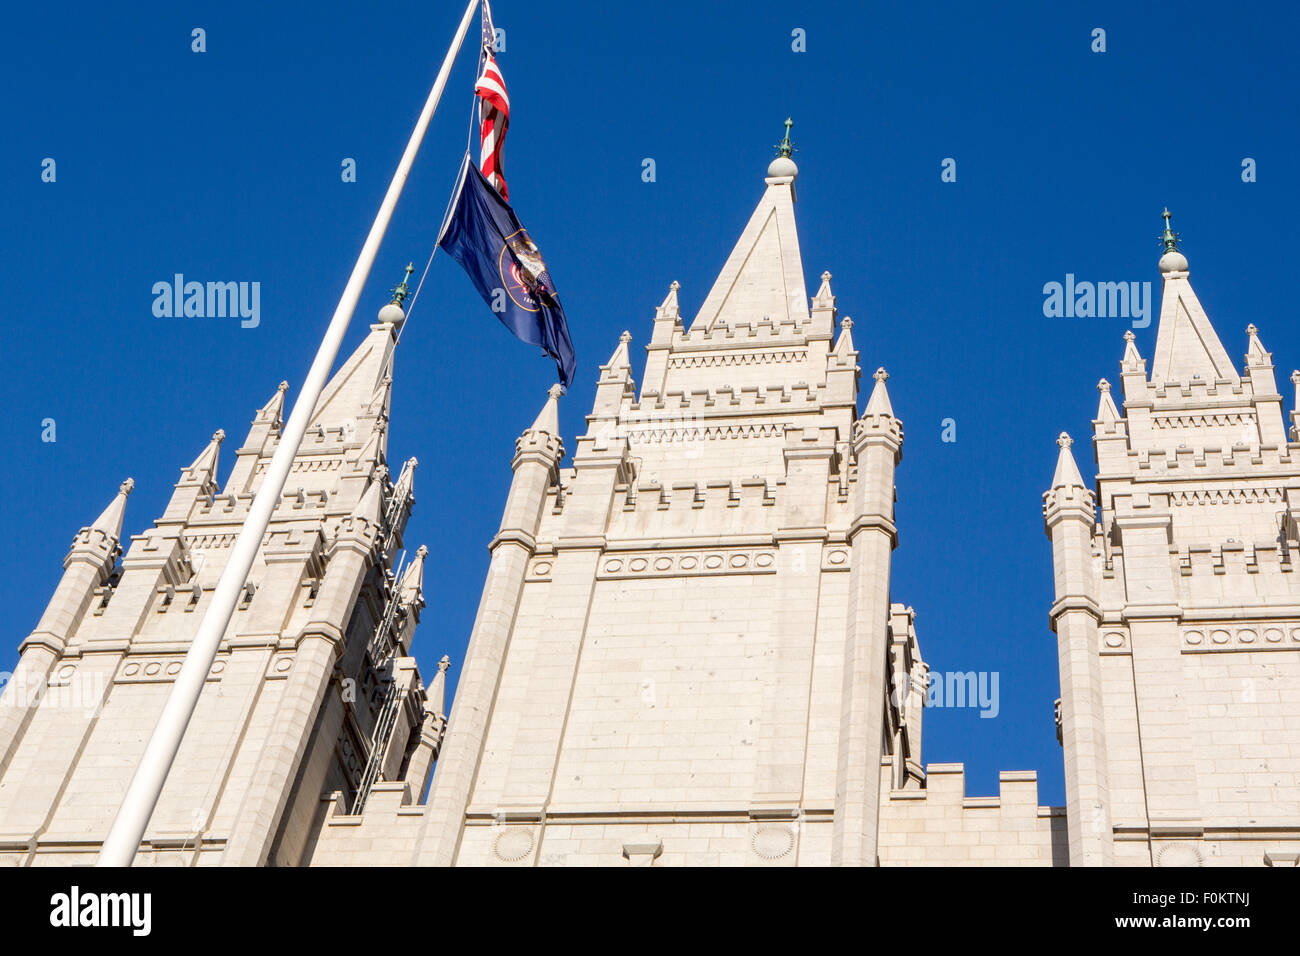 Mormon Church in Salt Lake city with a clear blue sky in the background, United States 2012. Stock Photo